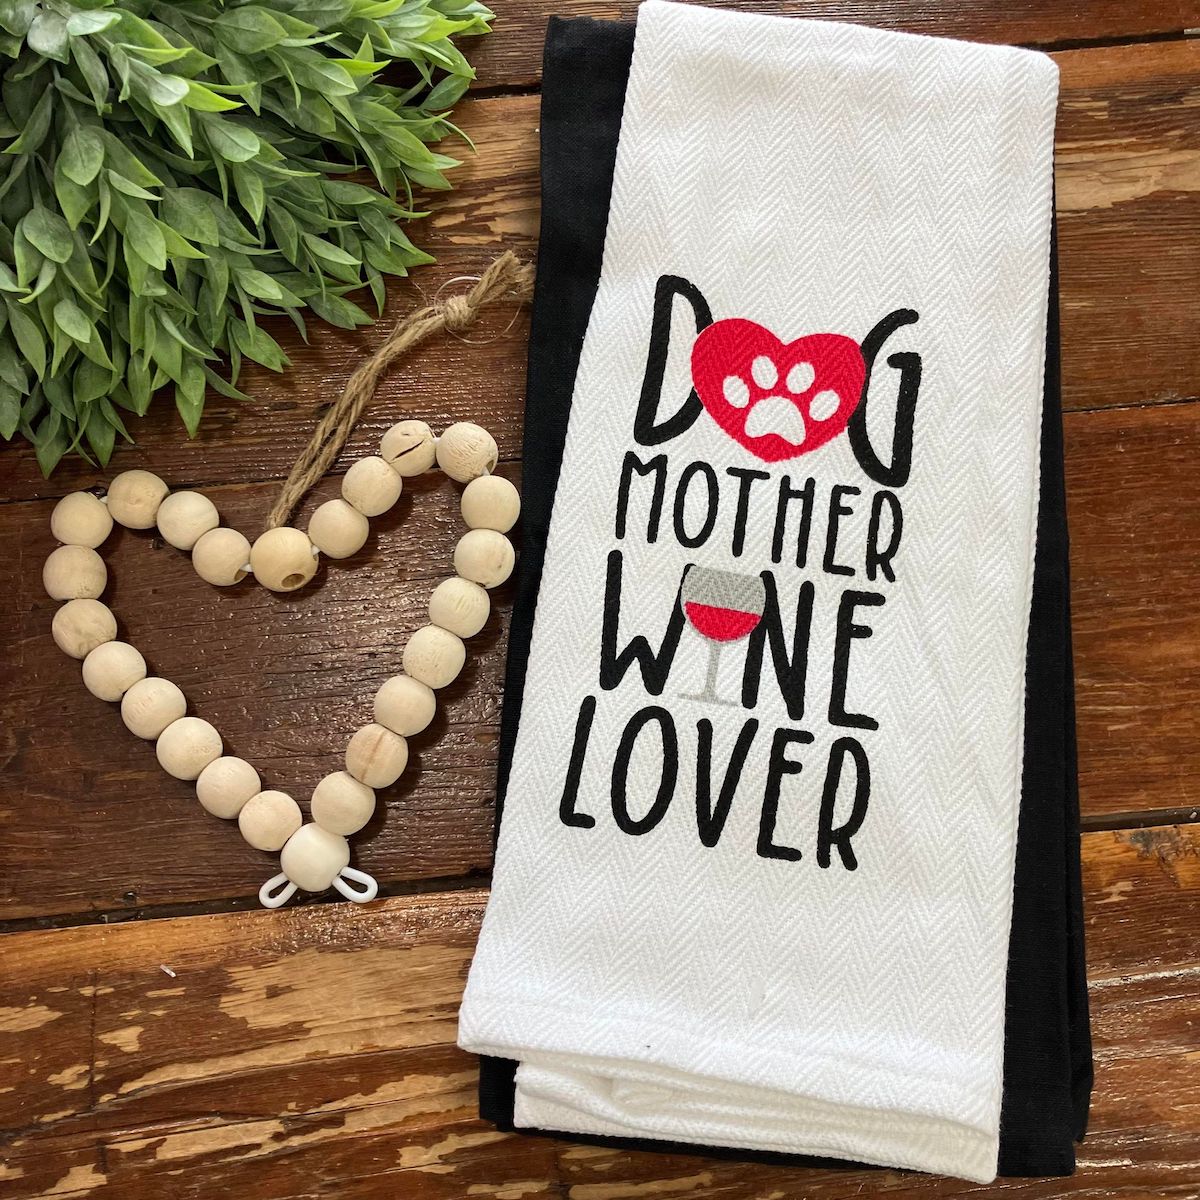 Dog Mother Wine Lover Kitchen Towel with Beaded Heart